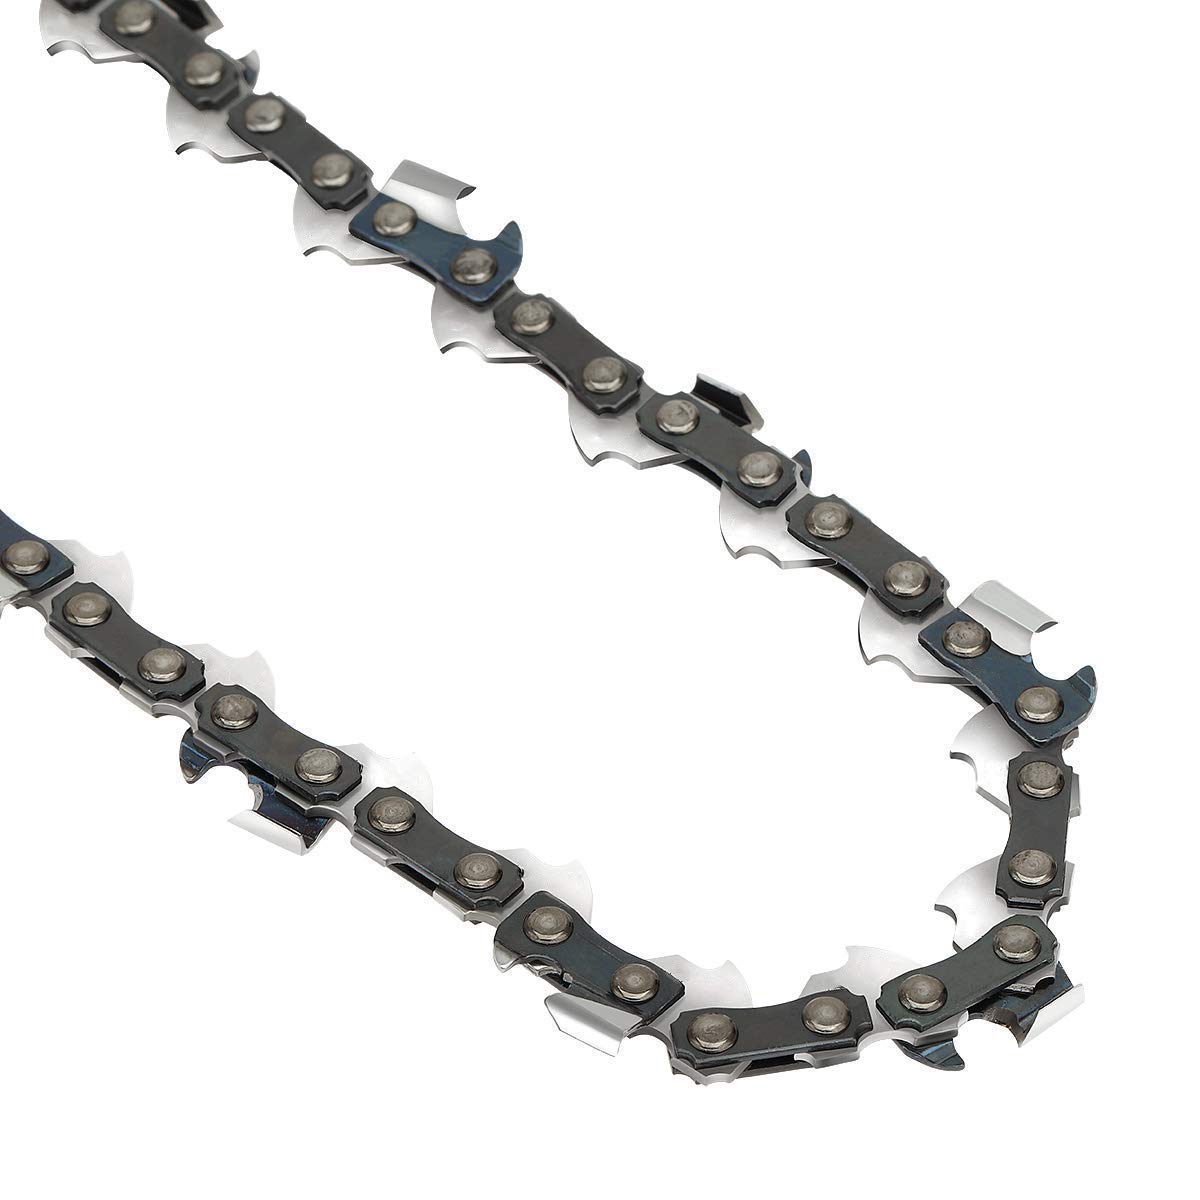 Jeremywell S44 12 Inch Chainsaw Chain Blade 44 Drive Links 3/8" LP Pitch 0.050'' Gauge Fits Husqvarna Echo McCulloch Stihl MS 170 63PM 44 91VXL44CQ H35 (1 PACK)